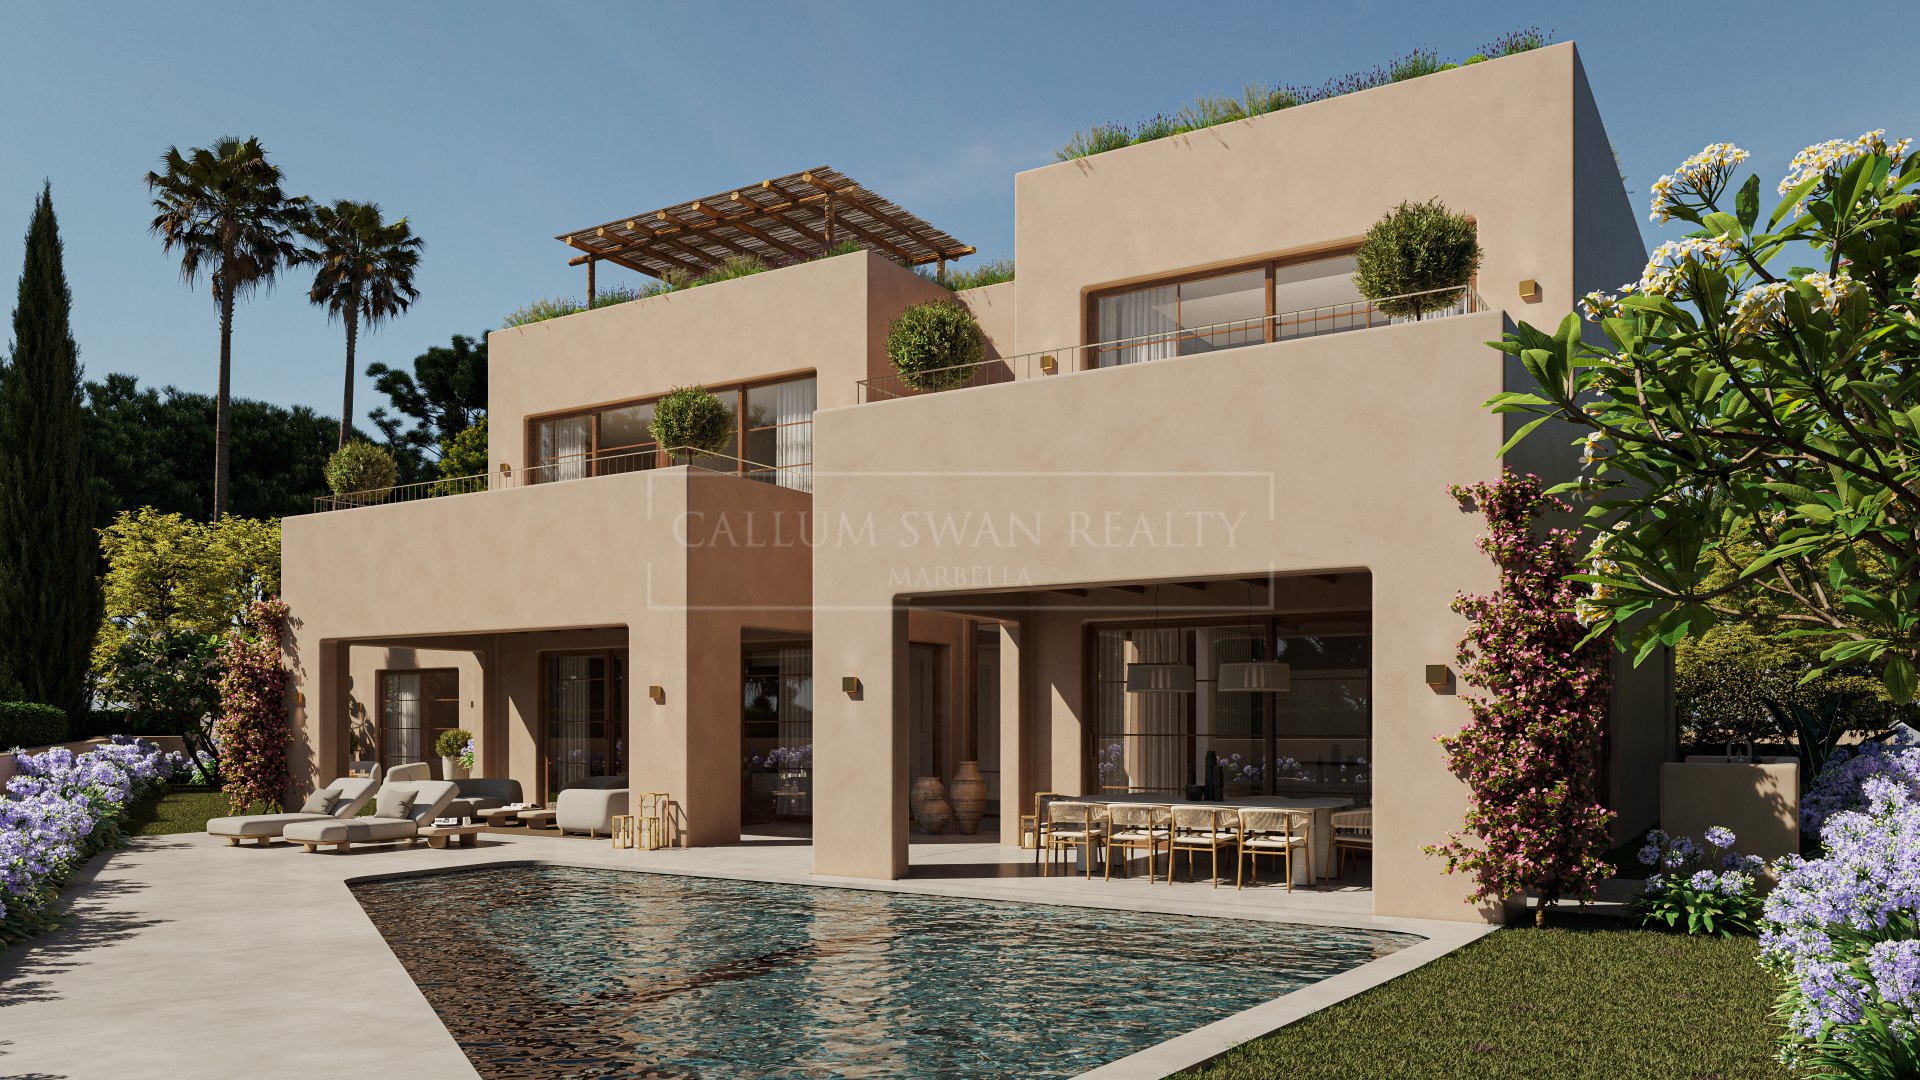 Stylish luxury villa project just a short walk from the beach